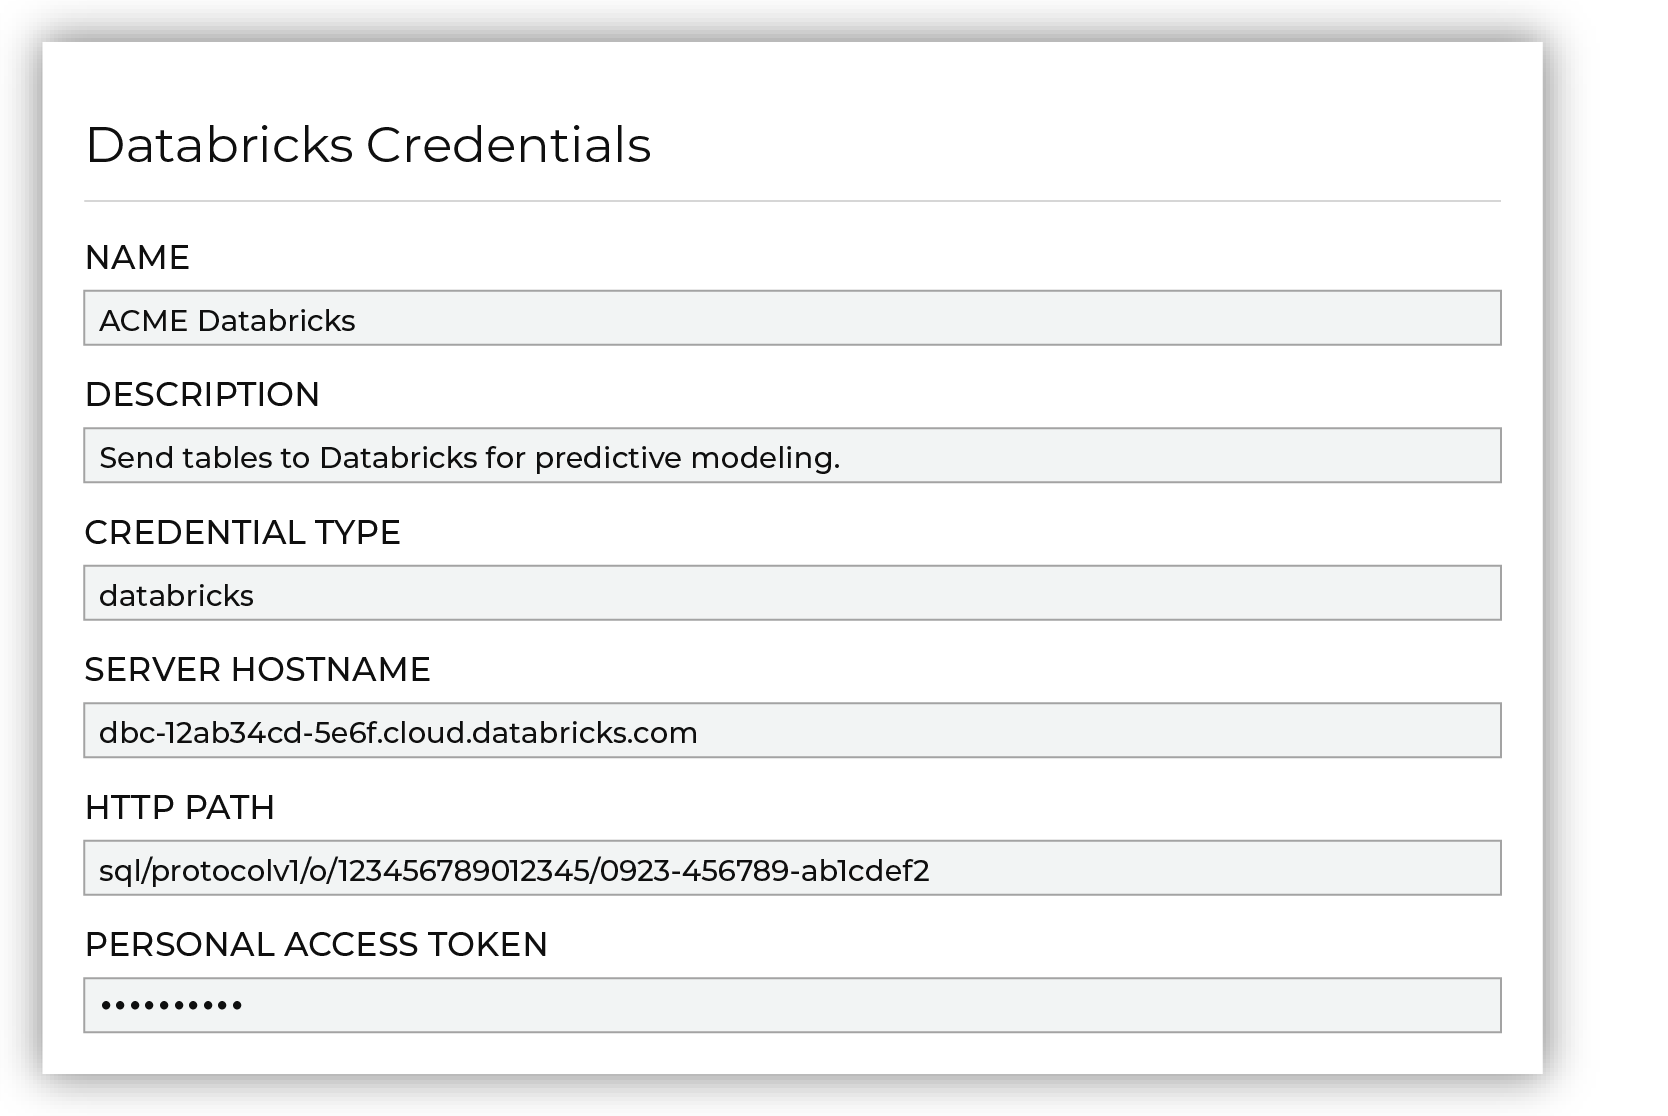 Add the settings that are required by Databricks.